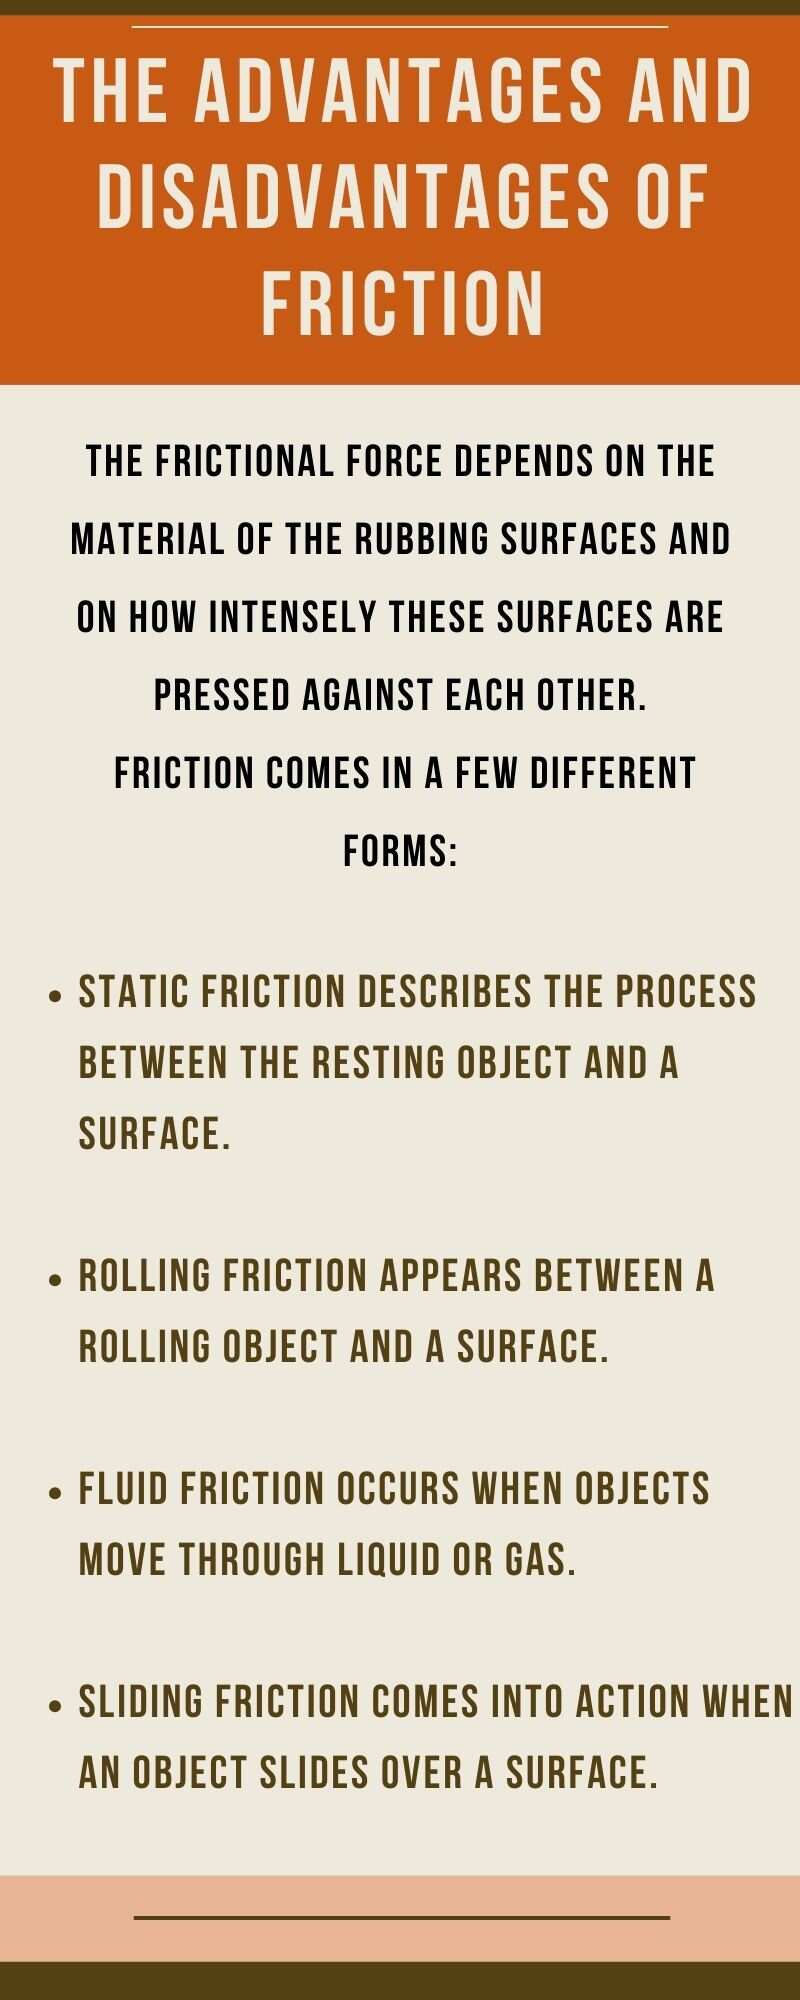 Advantages and disadvantages of friction